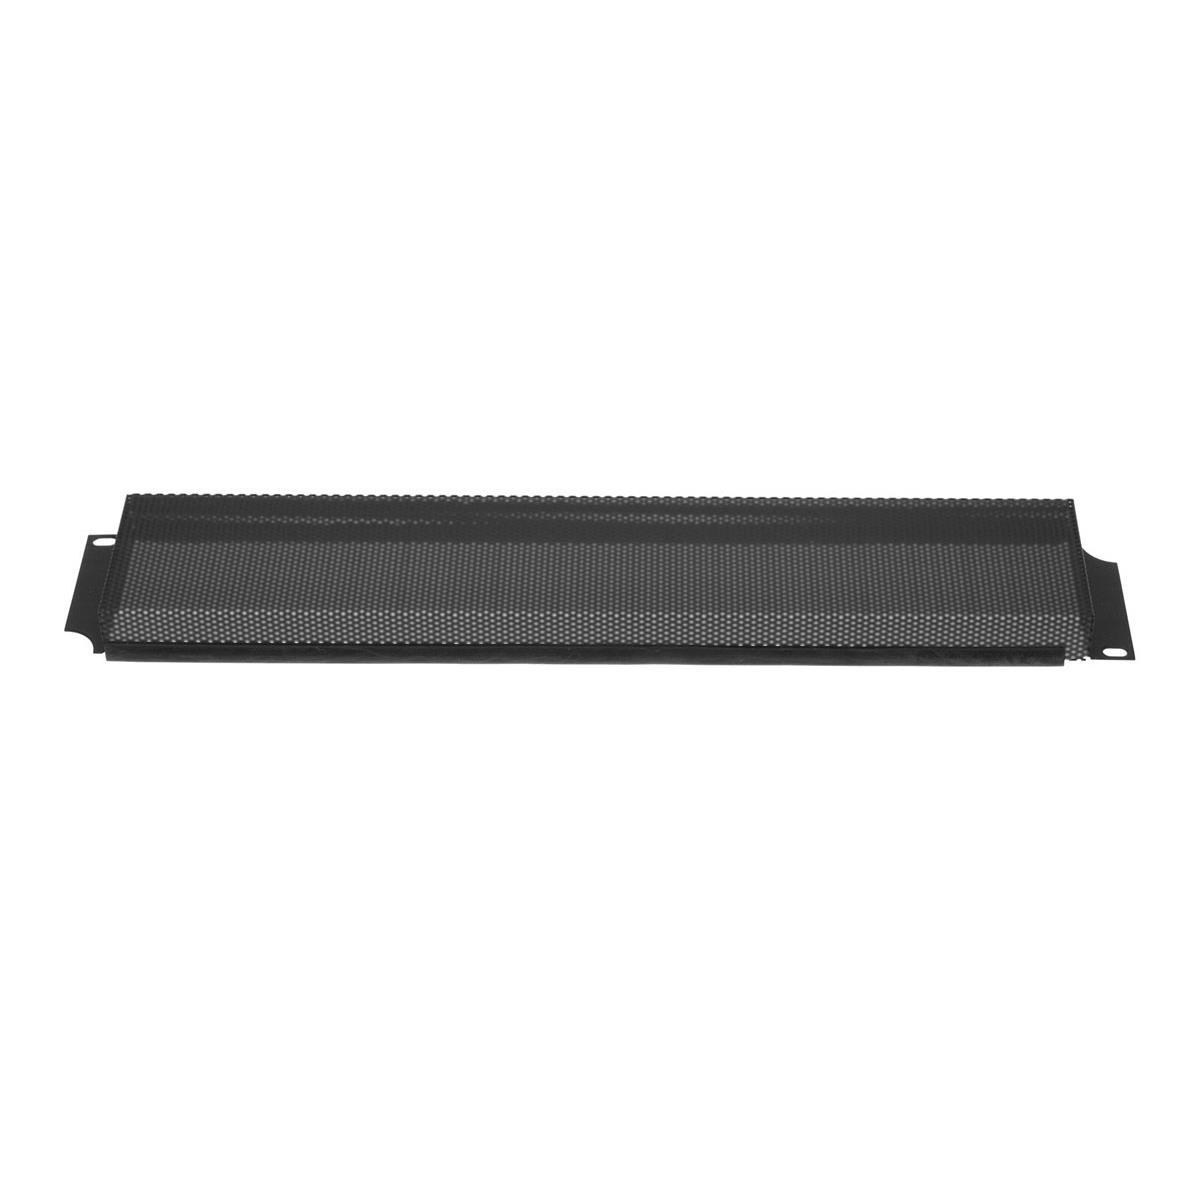 Image of Lowell Manufacturing SSC-3V 3U Rack Panel Security Cover